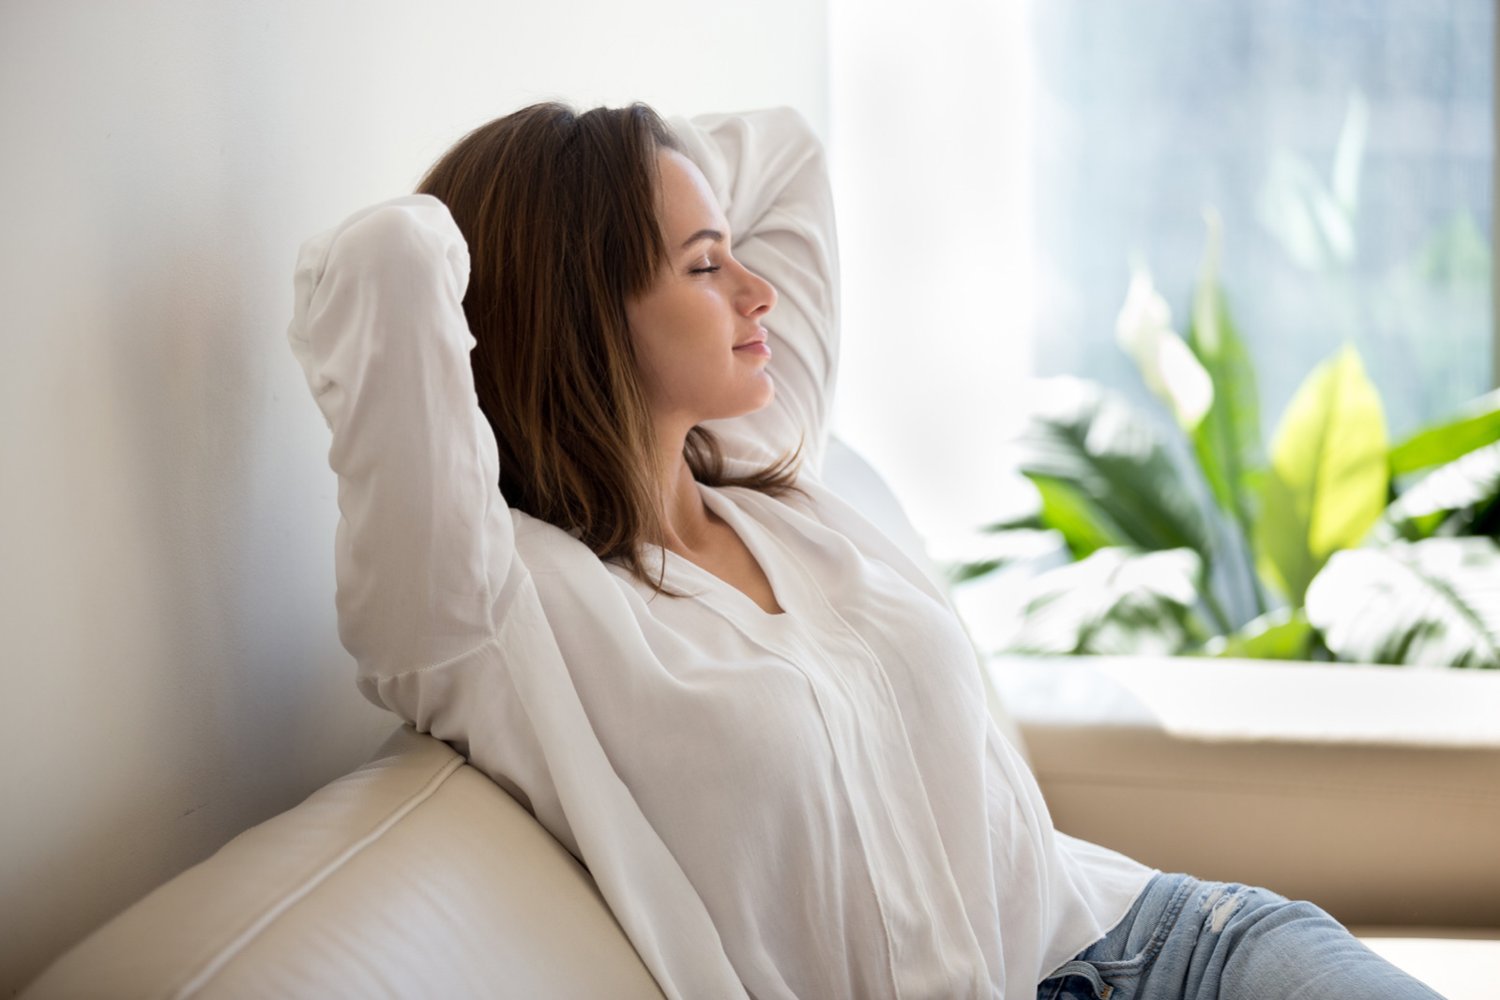 How mindfulness helps - Smiling woman sitting in couch with eyes closed hands behind head